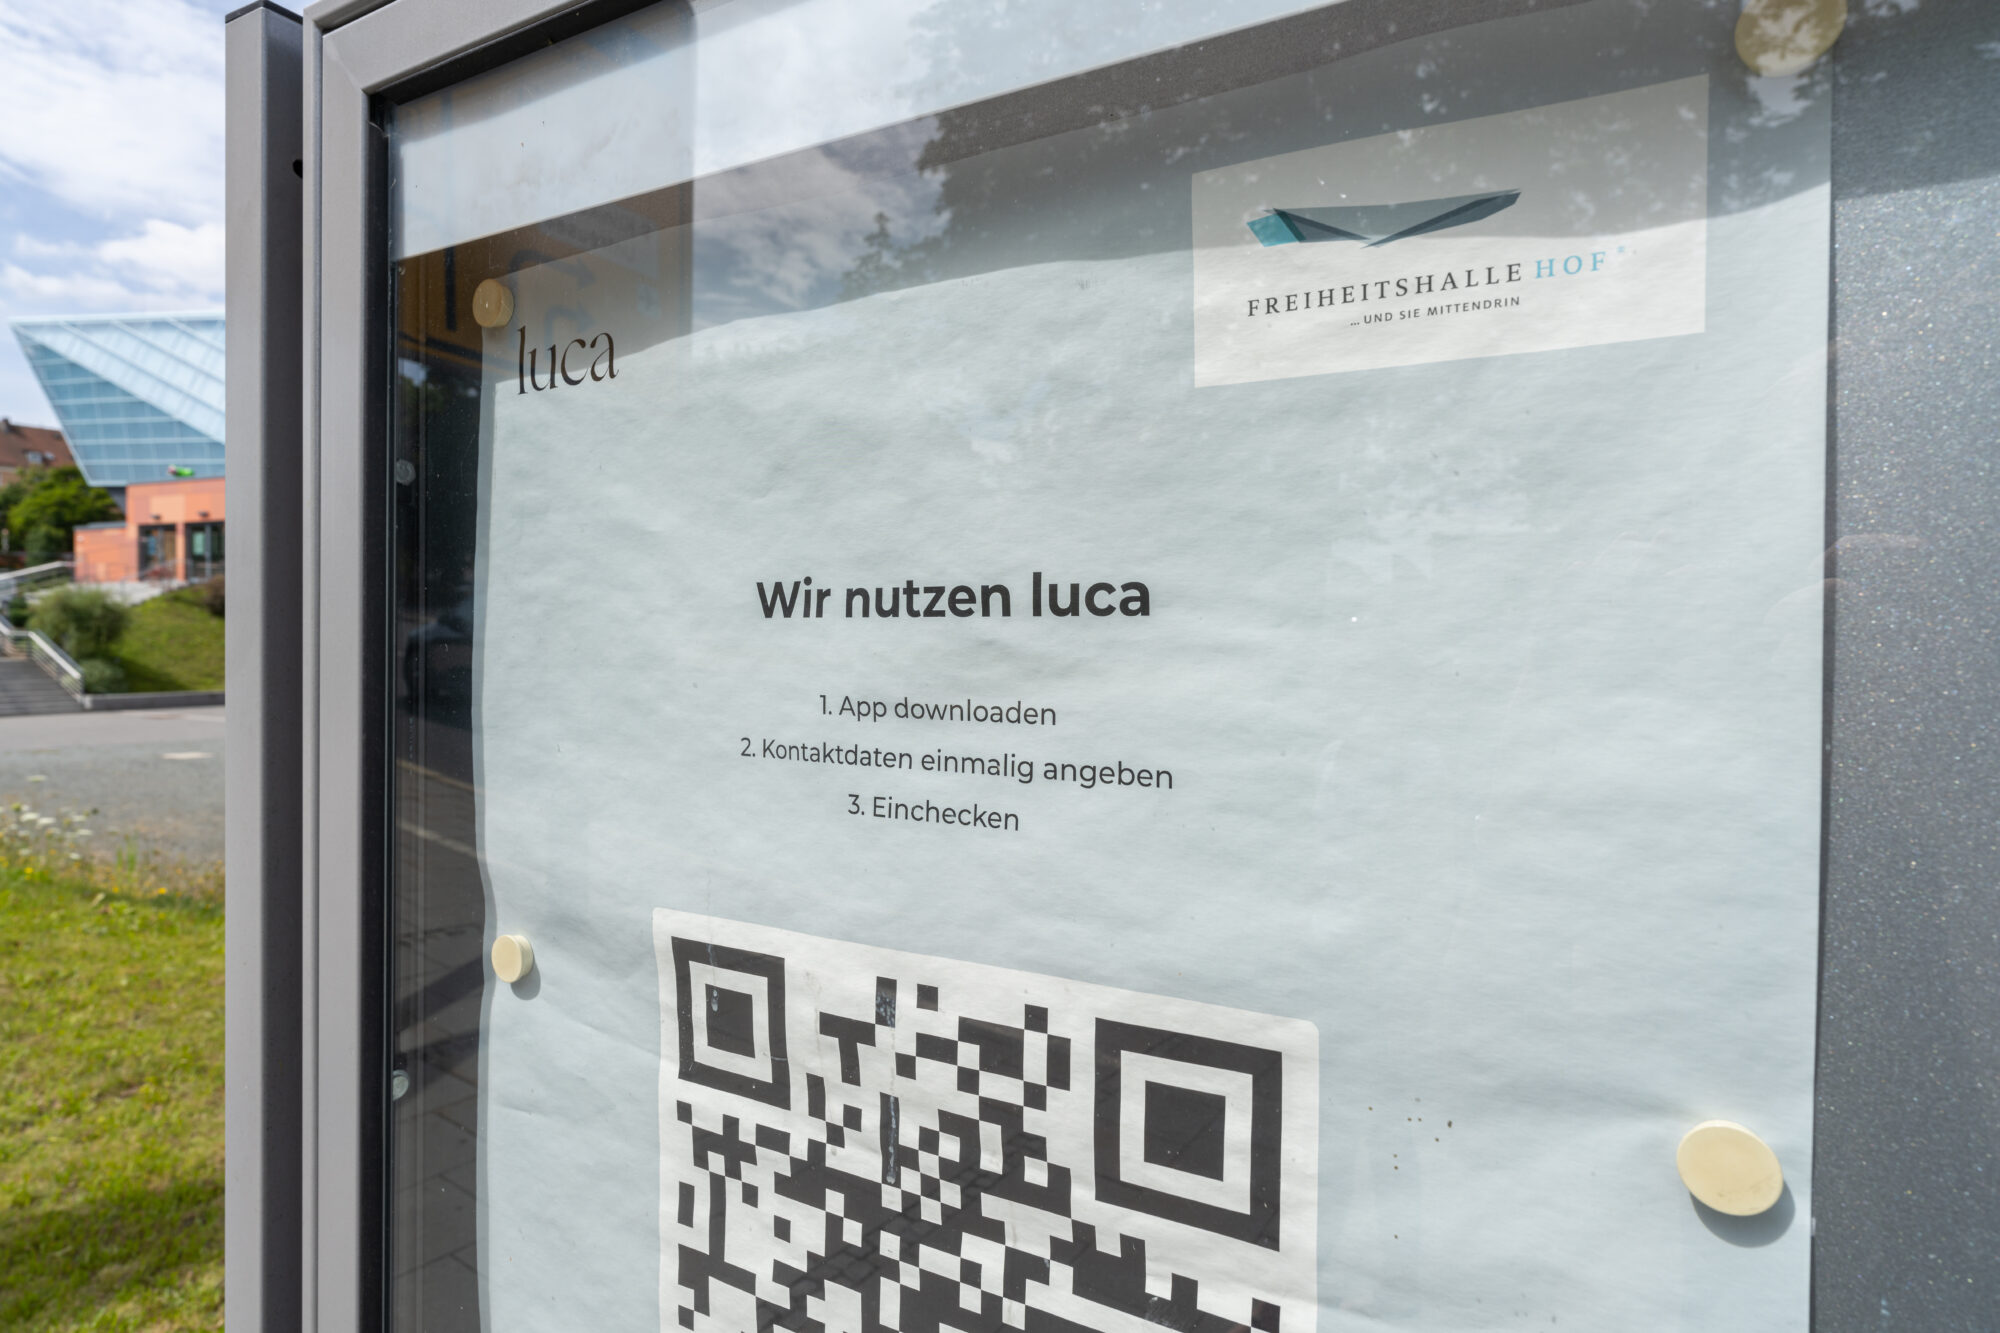 Tracking corona infections: German Luca app in a downfall